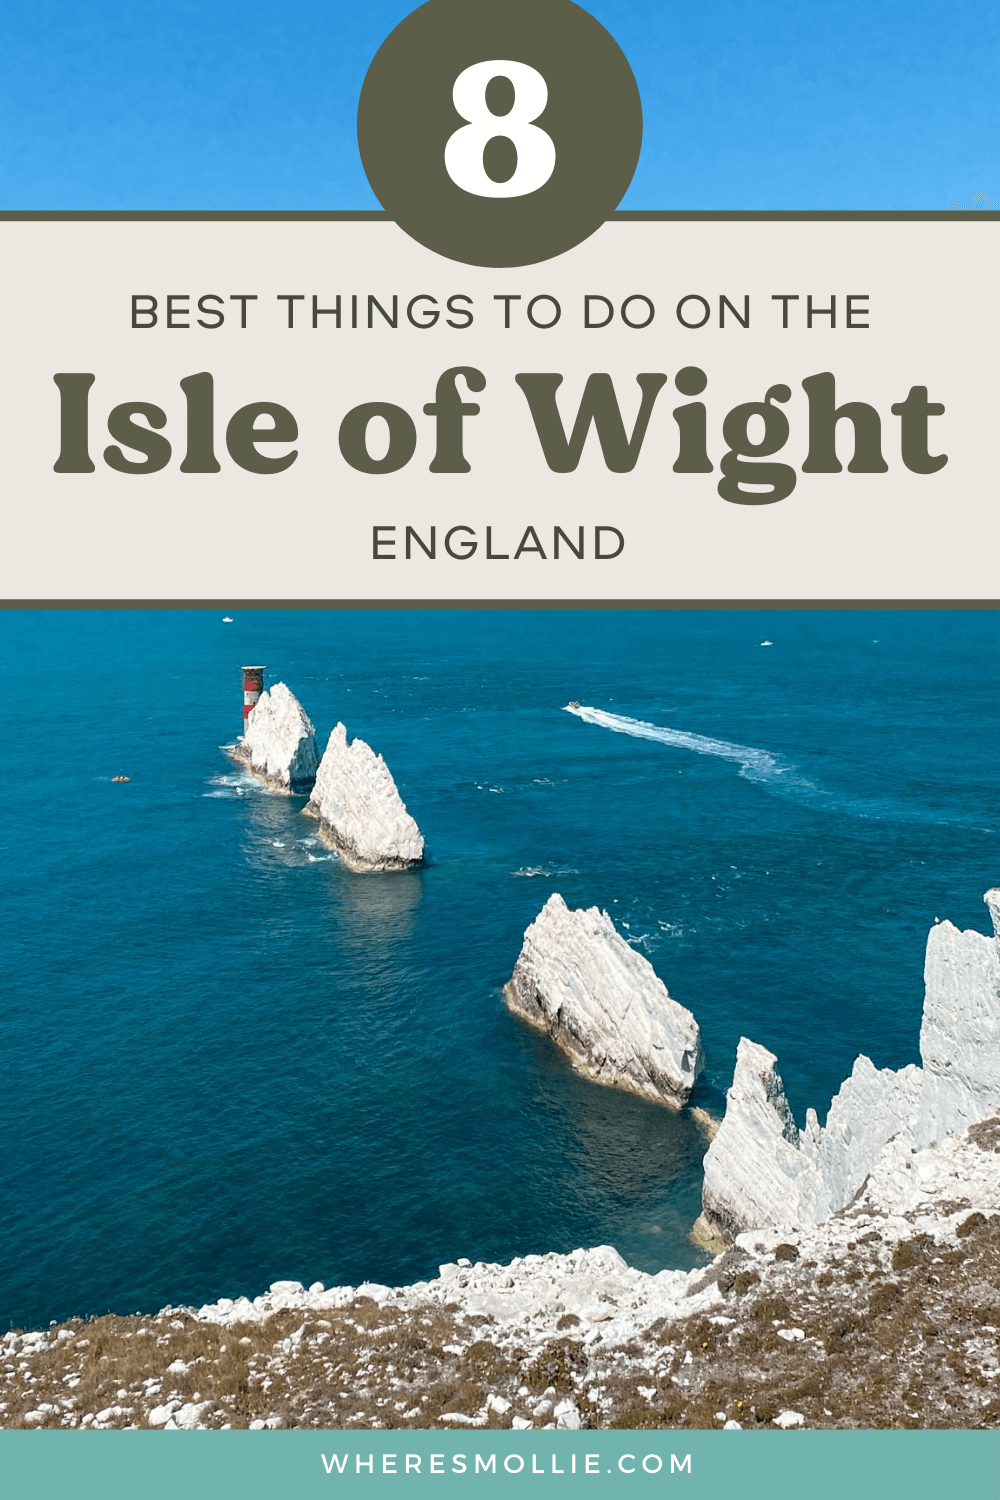 A weekend guide to the Isle of Wight, England